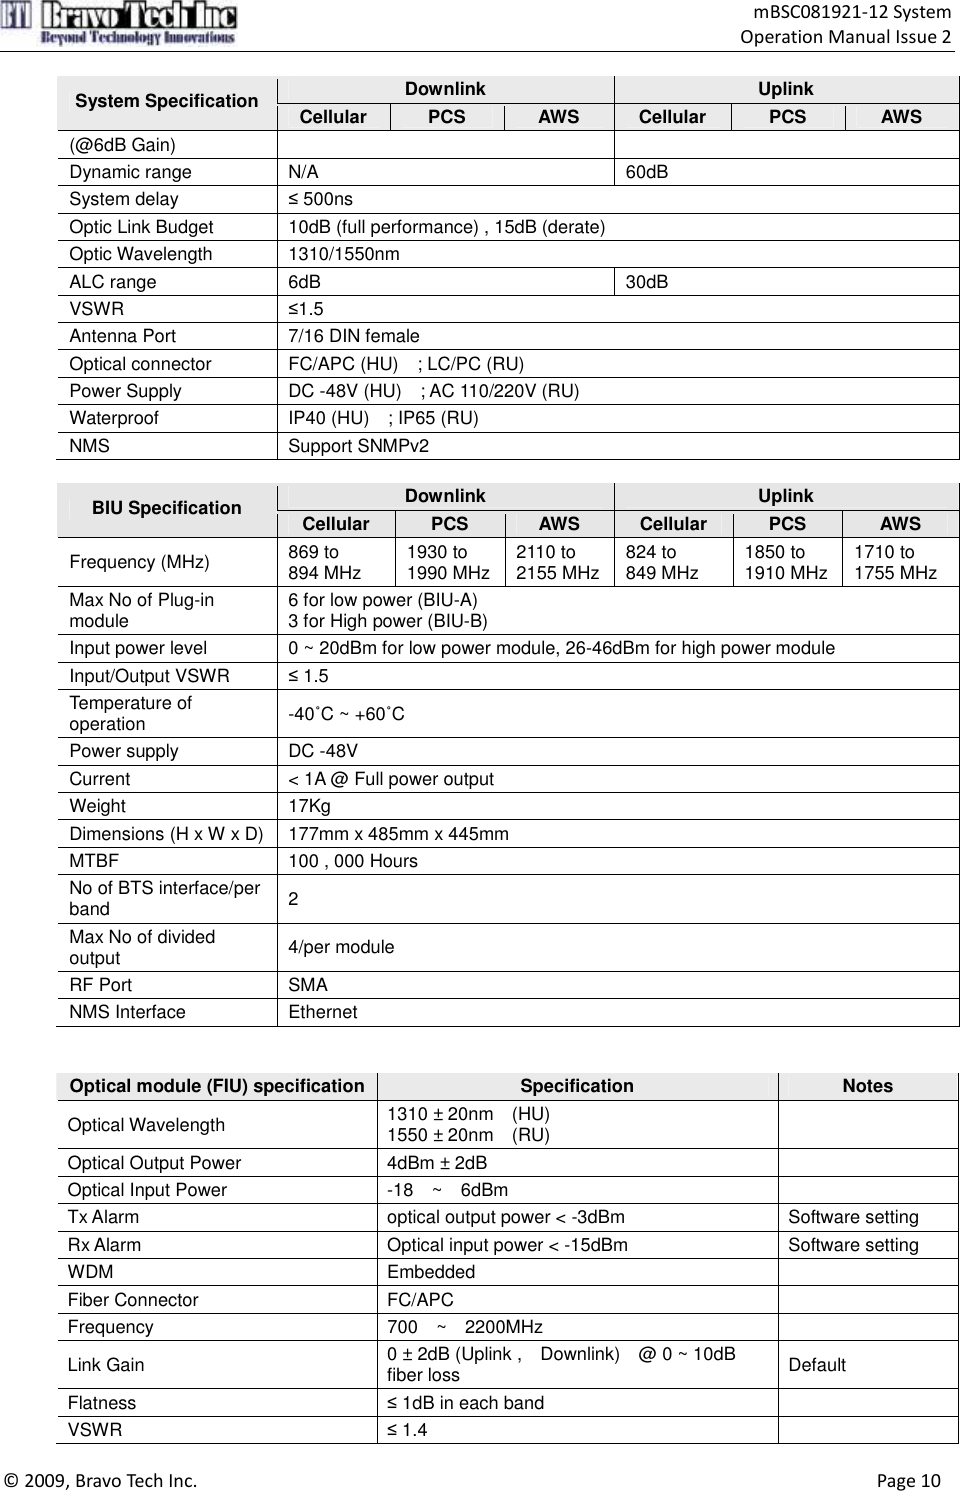                                    mBSC081921-12 System Operation Manual Issue 2  © 2009, Bravo Tech Inc.                                                                                                                                      Page 10  Downlink  Uplink System Specification Cellular  PCS  AWS  Cellular  PCS  AWS (@6dB Gain)     Dynamic range  N/A  60dB System delay  ≤ 500ns Optic Link Budget  10dB (full performance) , 15dB (derate)     Optic Wavelength  1310/1550nm ALC range  6dB  30dB VSWR  ≤1.5 Antenna Port  7/16 DIN female Optical connector  FC/APC (HU)    ; LC/PC (RU)     Power Supply  DC -48V (HU)    ; AC 110/220V (RU)     Waterproof  IP40 (HU)    ; IP65 (RU)     NMS  Support SNMPv2  Downlink  Uplink BIU Specification  Cellular  PCS  AWS  Cellular  PCS  AWS Frequency (MHz)      869 to 894 MHz  1930 to 1990 MHz 2110 to 2155 MHz 824 to   849 MHz  1850 to 1910 MHz 1710 to 1755 MHz Max No of Plug-in module  6 for low power (BIU-A) 3 for High power (BIU-B) Input power level  0 ~ 20dBm for low power module, 26-46dBm for high power module Input/Output VSWR  ≤ 1.5 Temperature of operation  -40˚C ~ +60˚C Power supply  DC -48V Current  &lt; 1A @ Full power output Weight  17Kg Dimensions (H x W x D)   177mm x 485mm x 445mm MTBF  100 , 000 Hours No of BTS interface/per band    2 Max No of divided output  4/per module RF Port  SMA NMS Interface  Ethernet   Optical module (FIU) specification Specification  Notes Optical Wavelength  1310 ± 20nm    (HU) 1550 ± 20nm    (RU)       Optical Output Power  4dBm ± 2dB   Optical Input Power  -18    ~    6dBm   Tx Alarm  optical output power &lt; -3dBm  Software setting Rx Alarm  Optical input power &lt; -15dBm  Software setting WDM  Embedded   Fiber Connector  FC/APC   Frequency  700    ~    2200MHz   Link Gain  0 ± 2dB (Uplink ,    Downlink)    @ 0 ~ 10dB fiber loss  Default   Flatness  ≤ 1dB in each band         VSWR  ≤ 1.4   